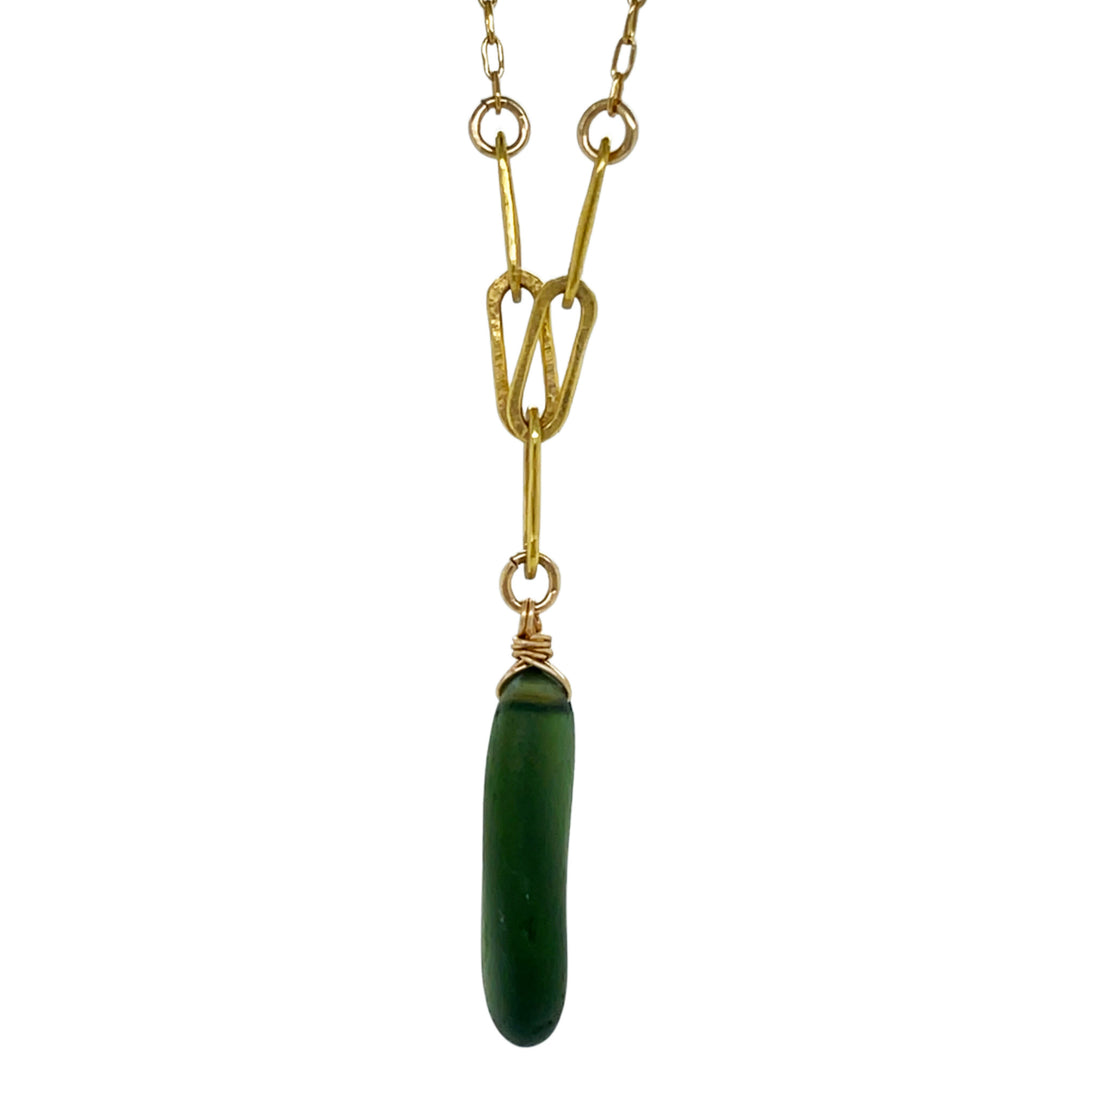 gold and green pendant necklace australia